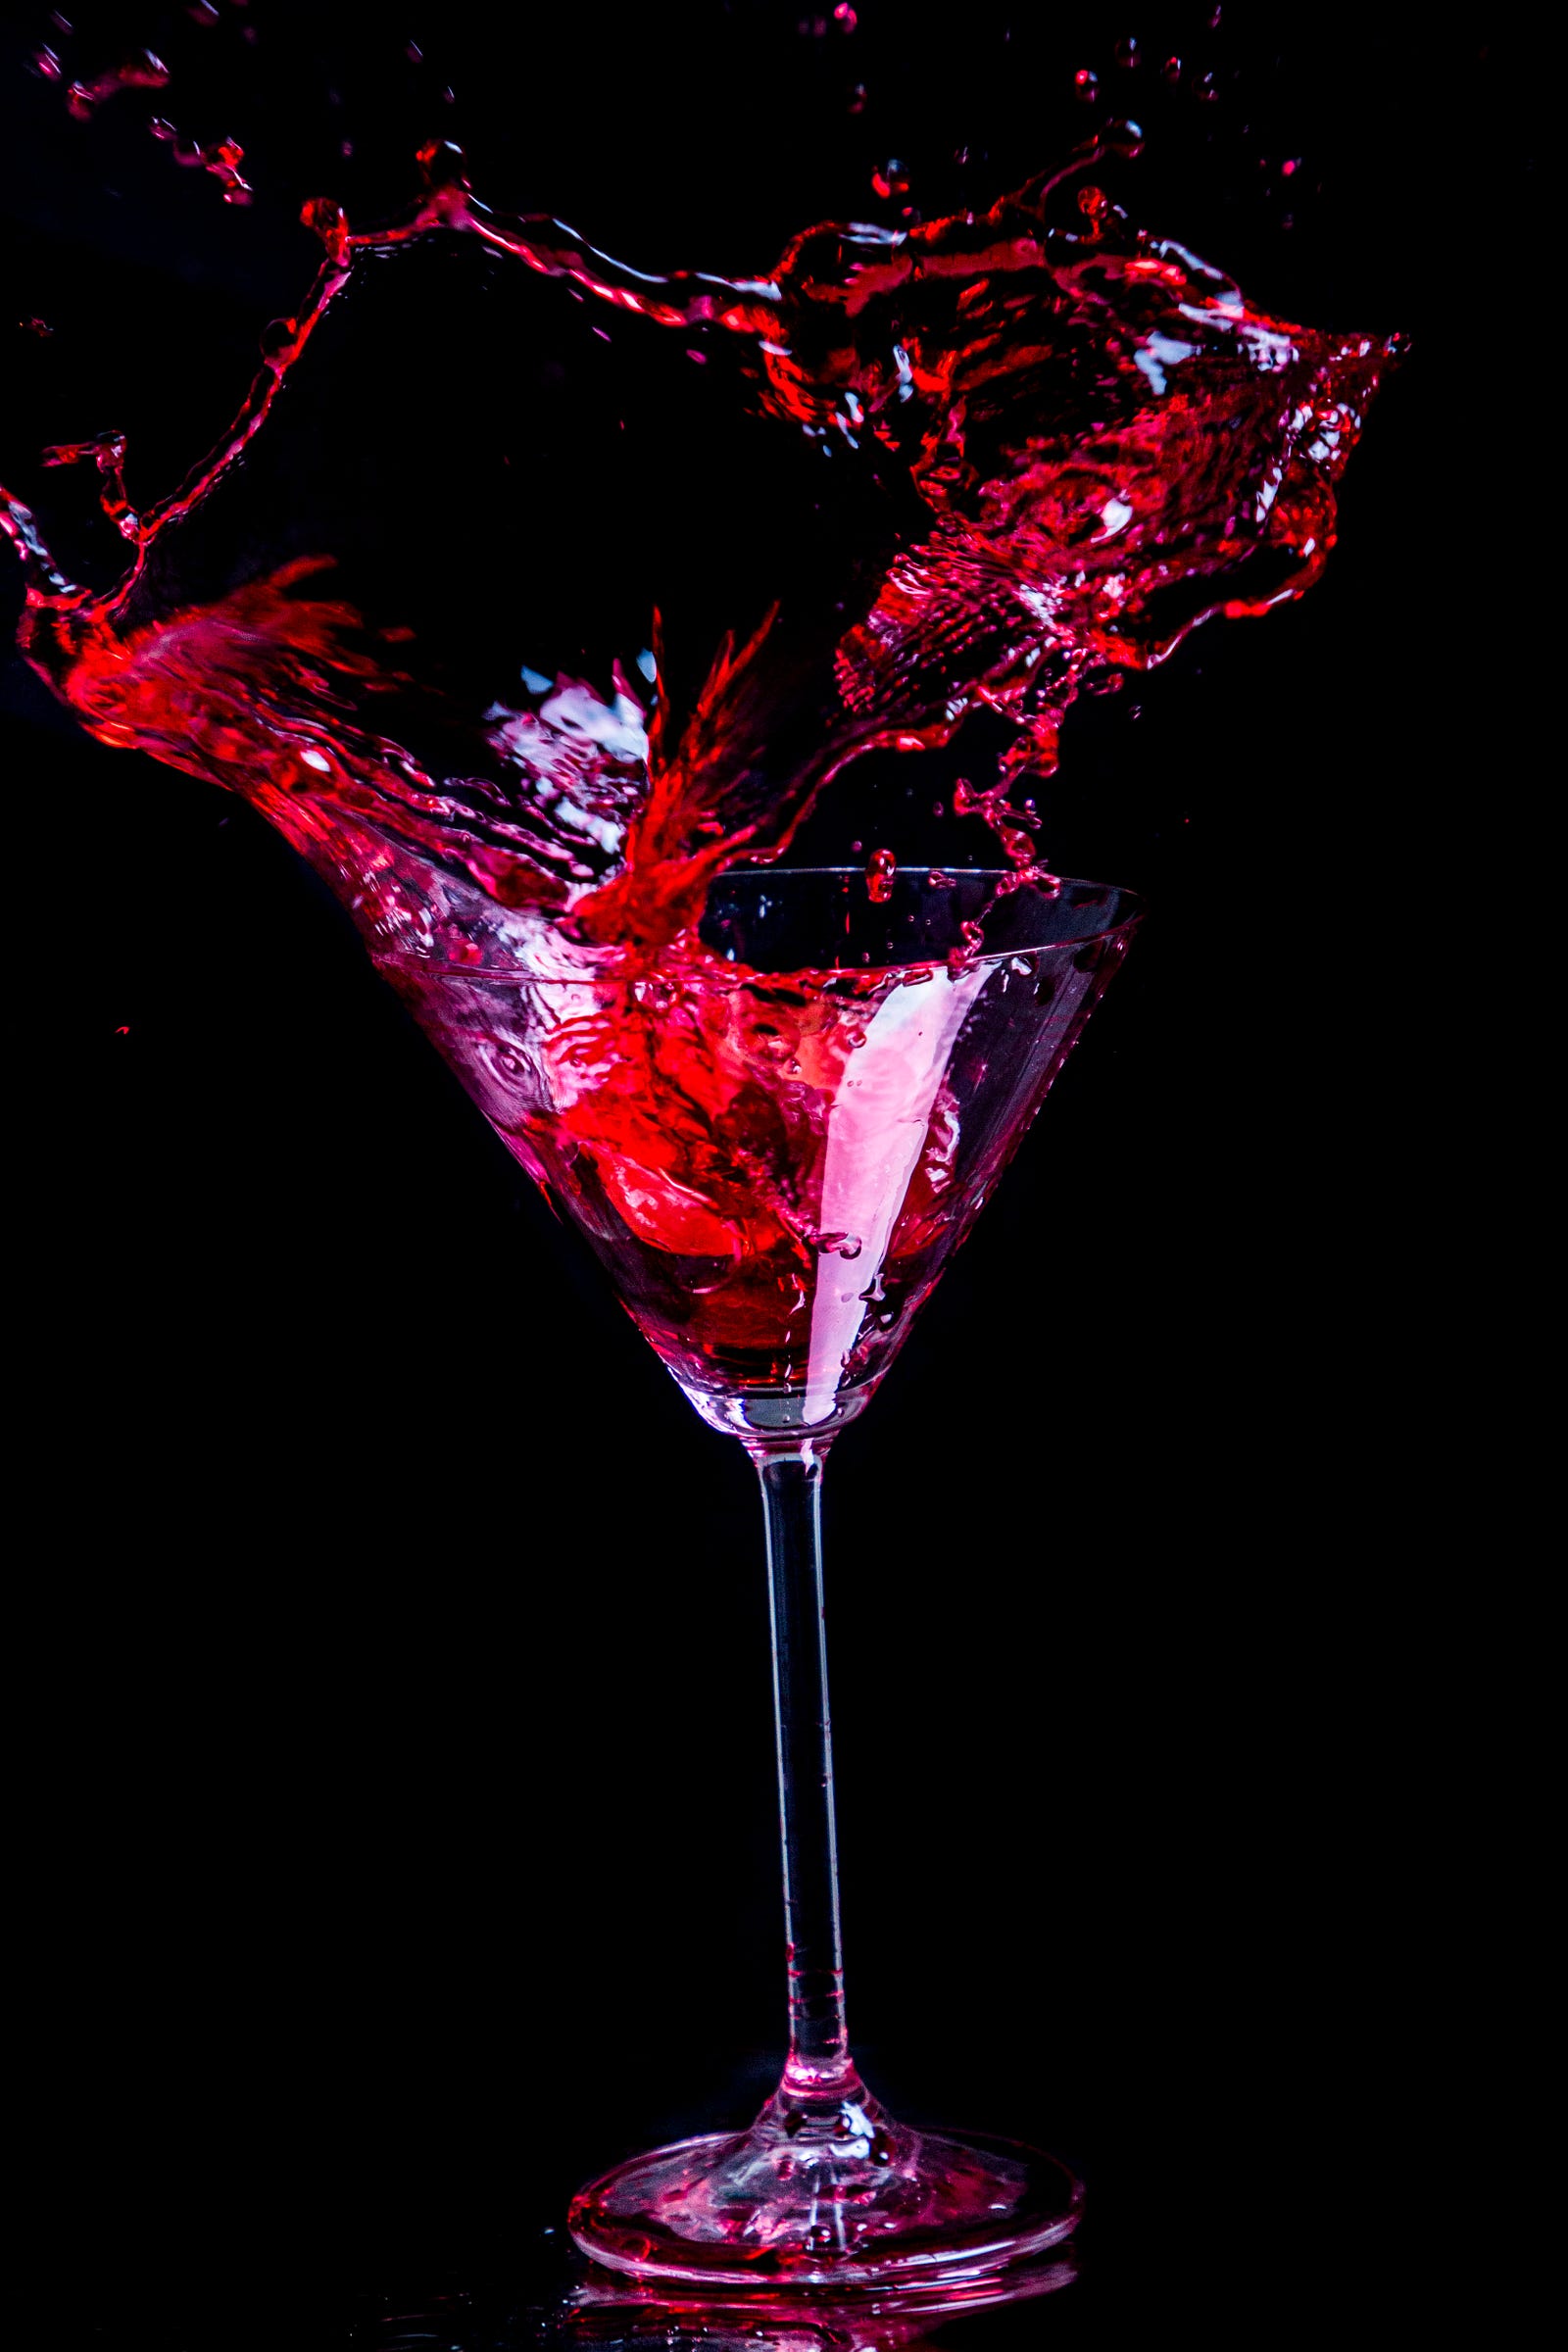 A cone-shaped glass with a stem has red fluid splashing upward. Heavy alcohol consumption has been consistently associated with an increased risk of cardiovascular diseases, including the following: High blood pressure (hypertension) Arrhythmias Coronary artery disease Cardiomyopathy Heart attack Stroke